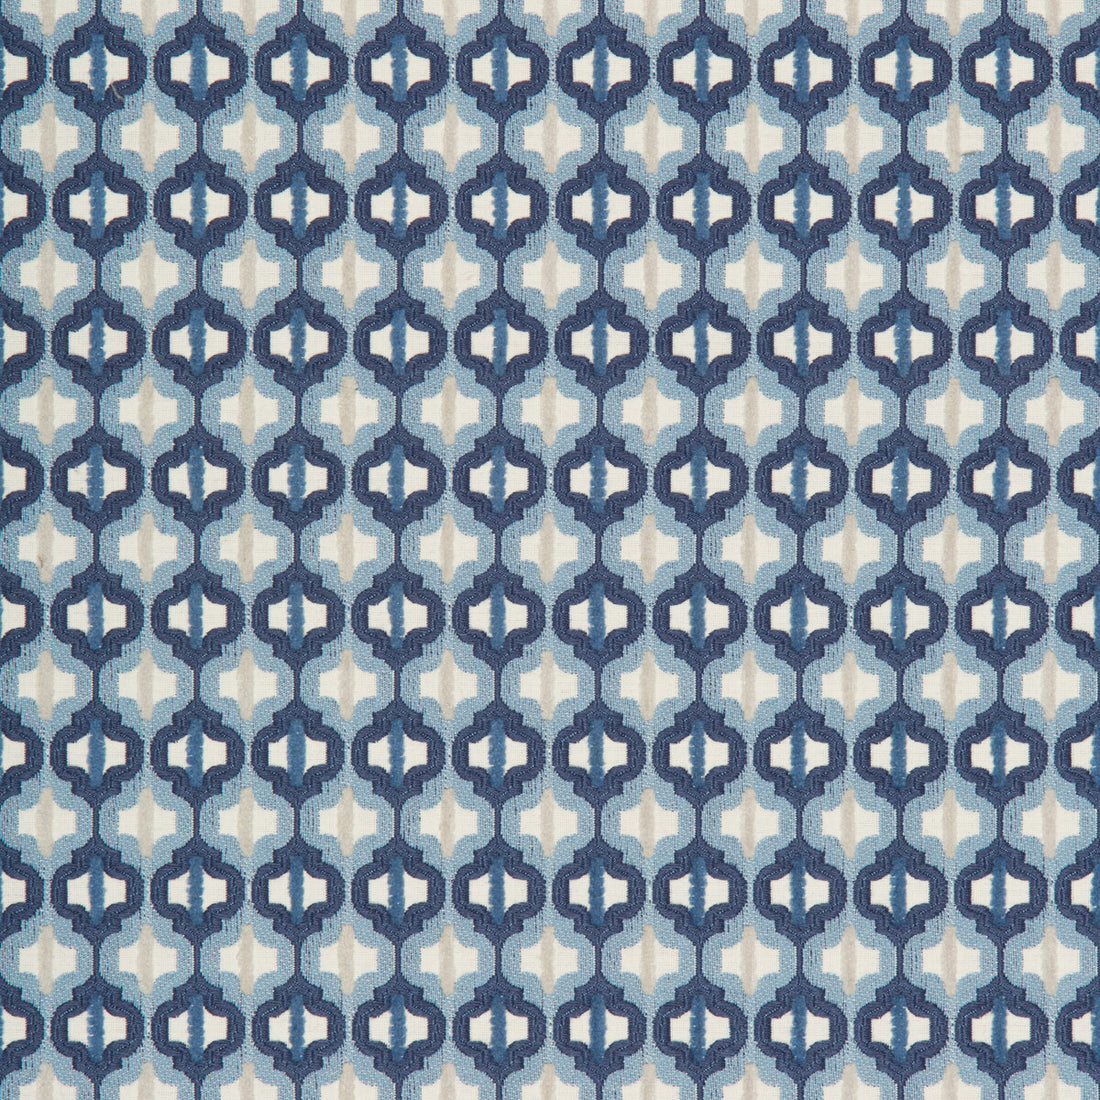 Turned Out Tile fabric in marine color - pattern 34794.5.0 - by Kravet Couture in the David Phoenix Well-Suited collection